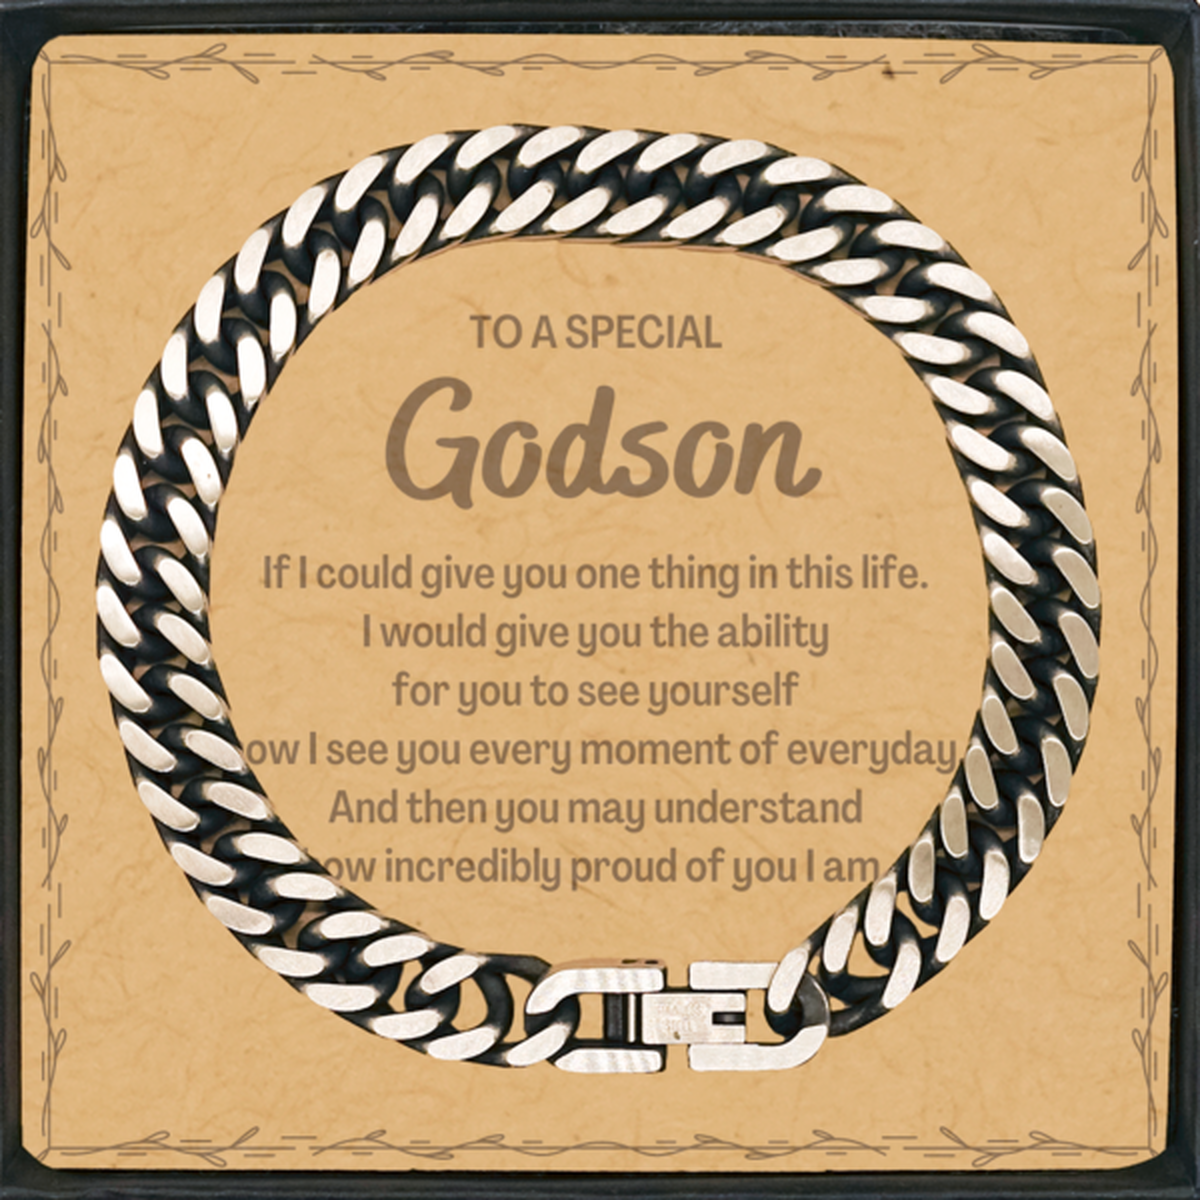 To My Godson Cuban Link Chain Bracelet, Gifts For Godson Message Card, Inspirational Gifts for Christmas Birthday, Epic Gifts for Godson To A Special Godson how incredibly proud of you I am